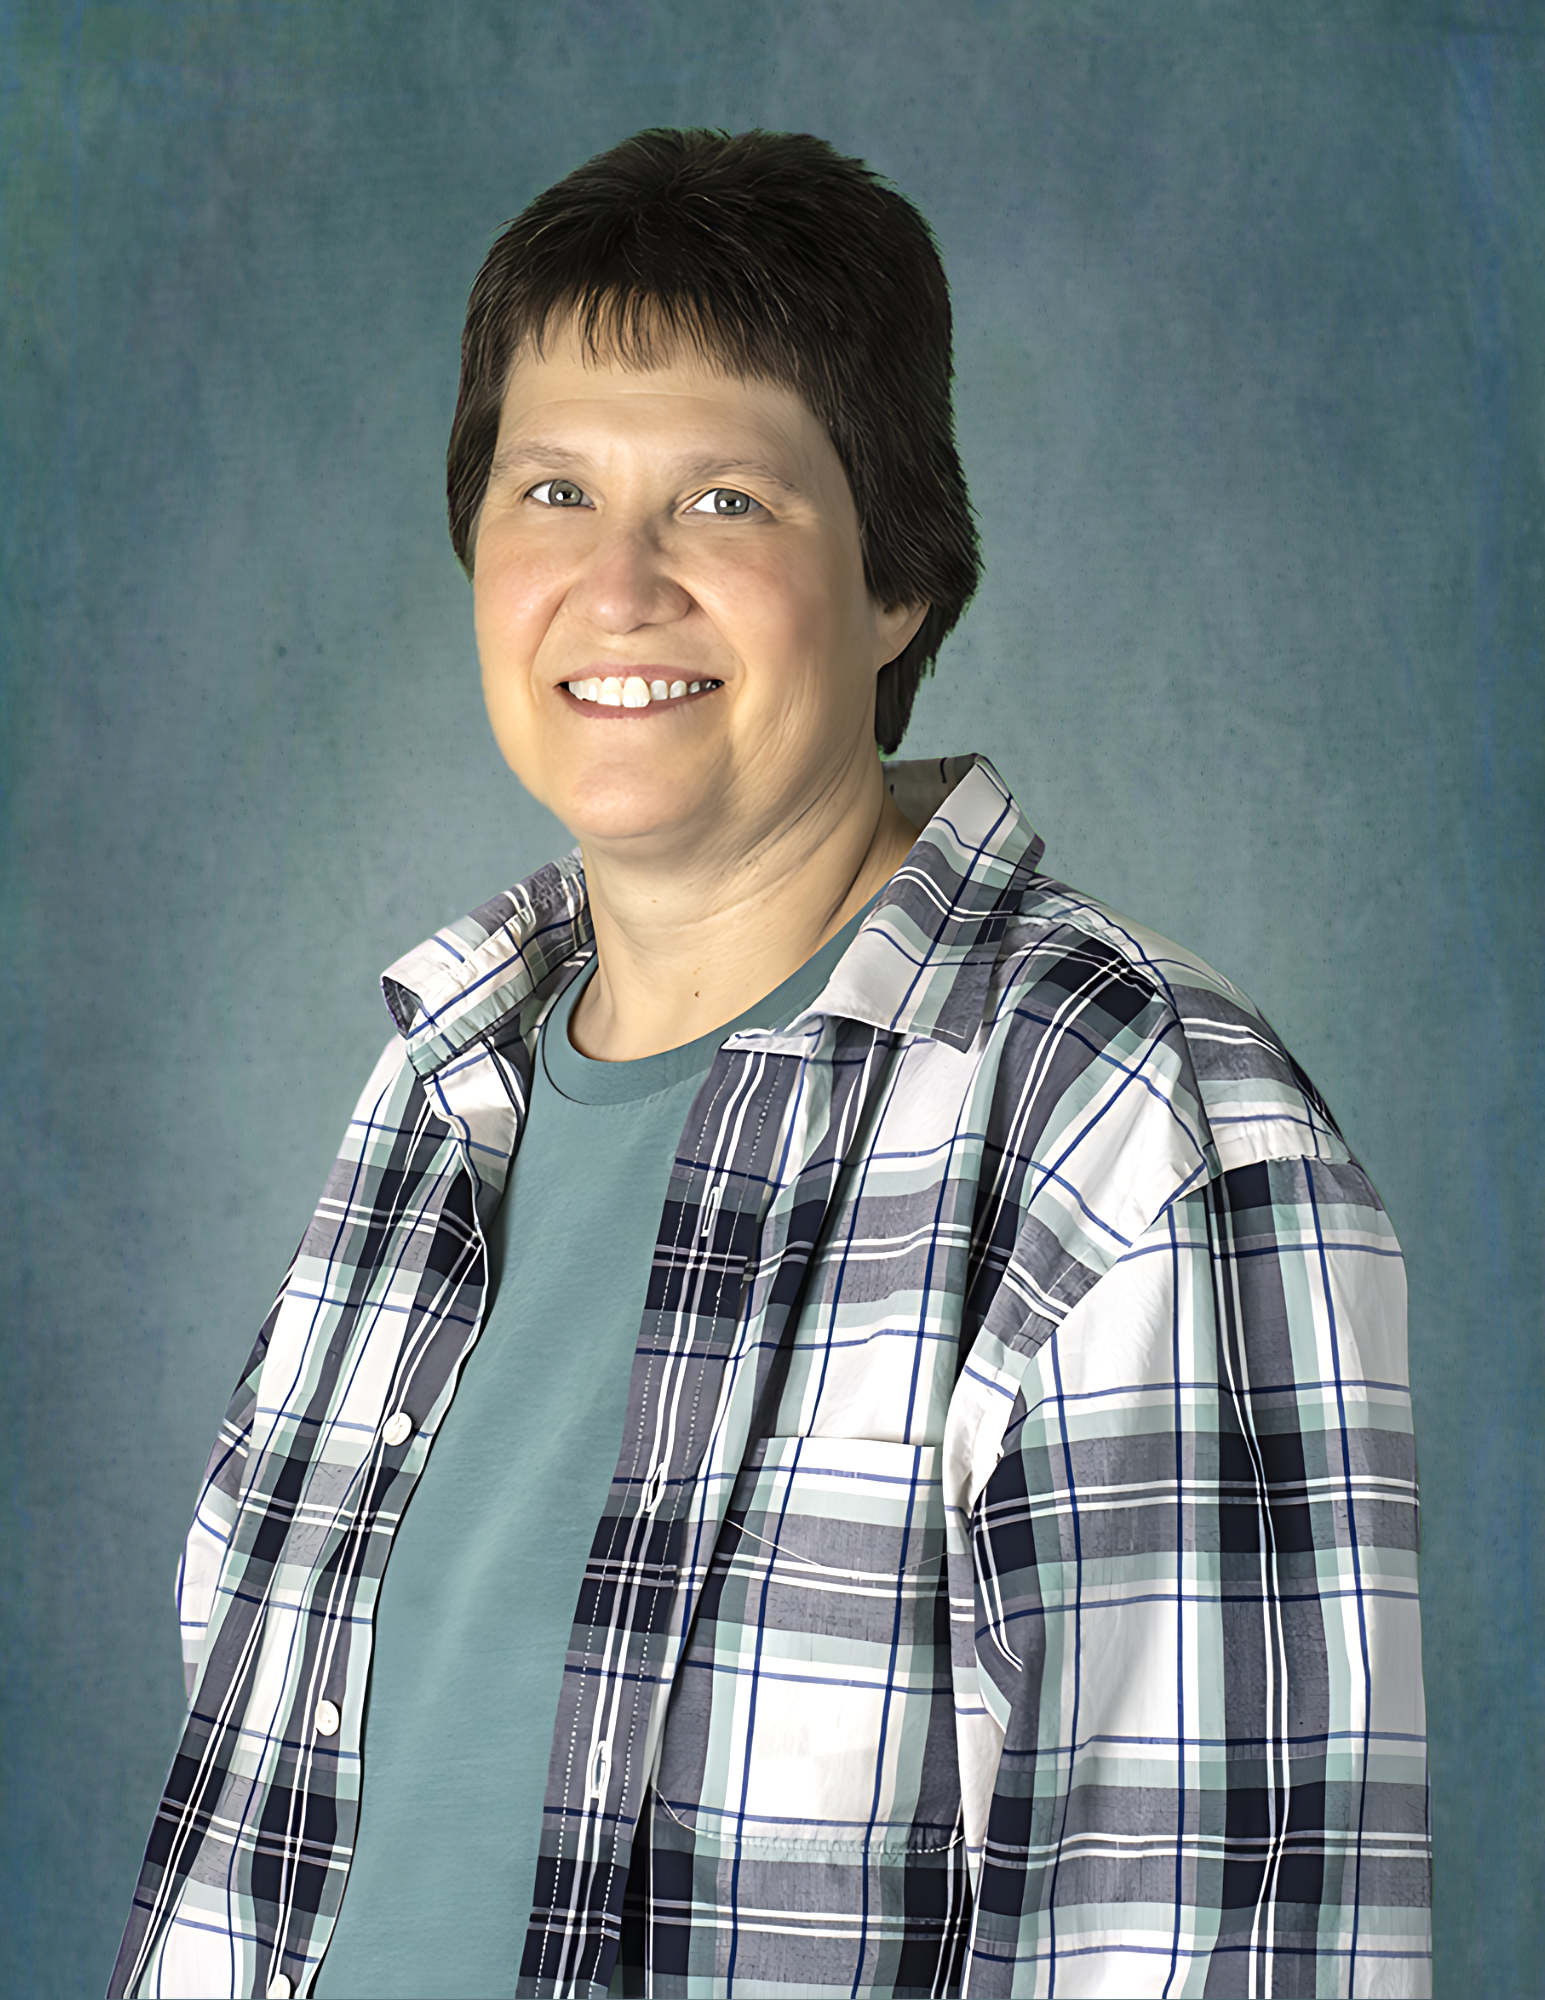 A woman wearing a plaid shirt is smiling for the camera